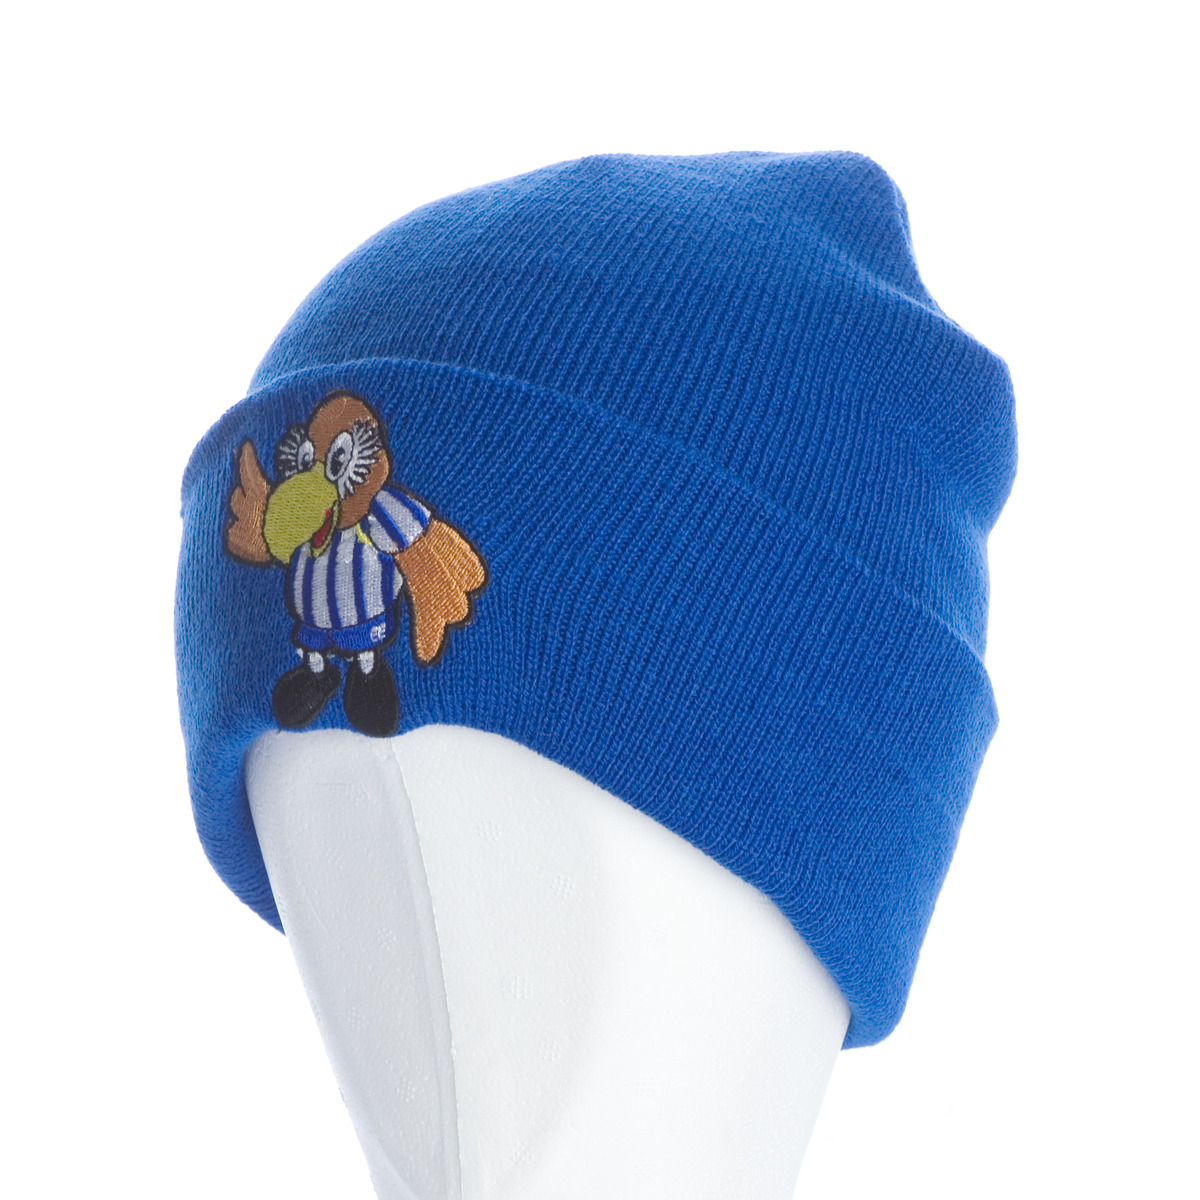 Colchester united football wooly hat. 